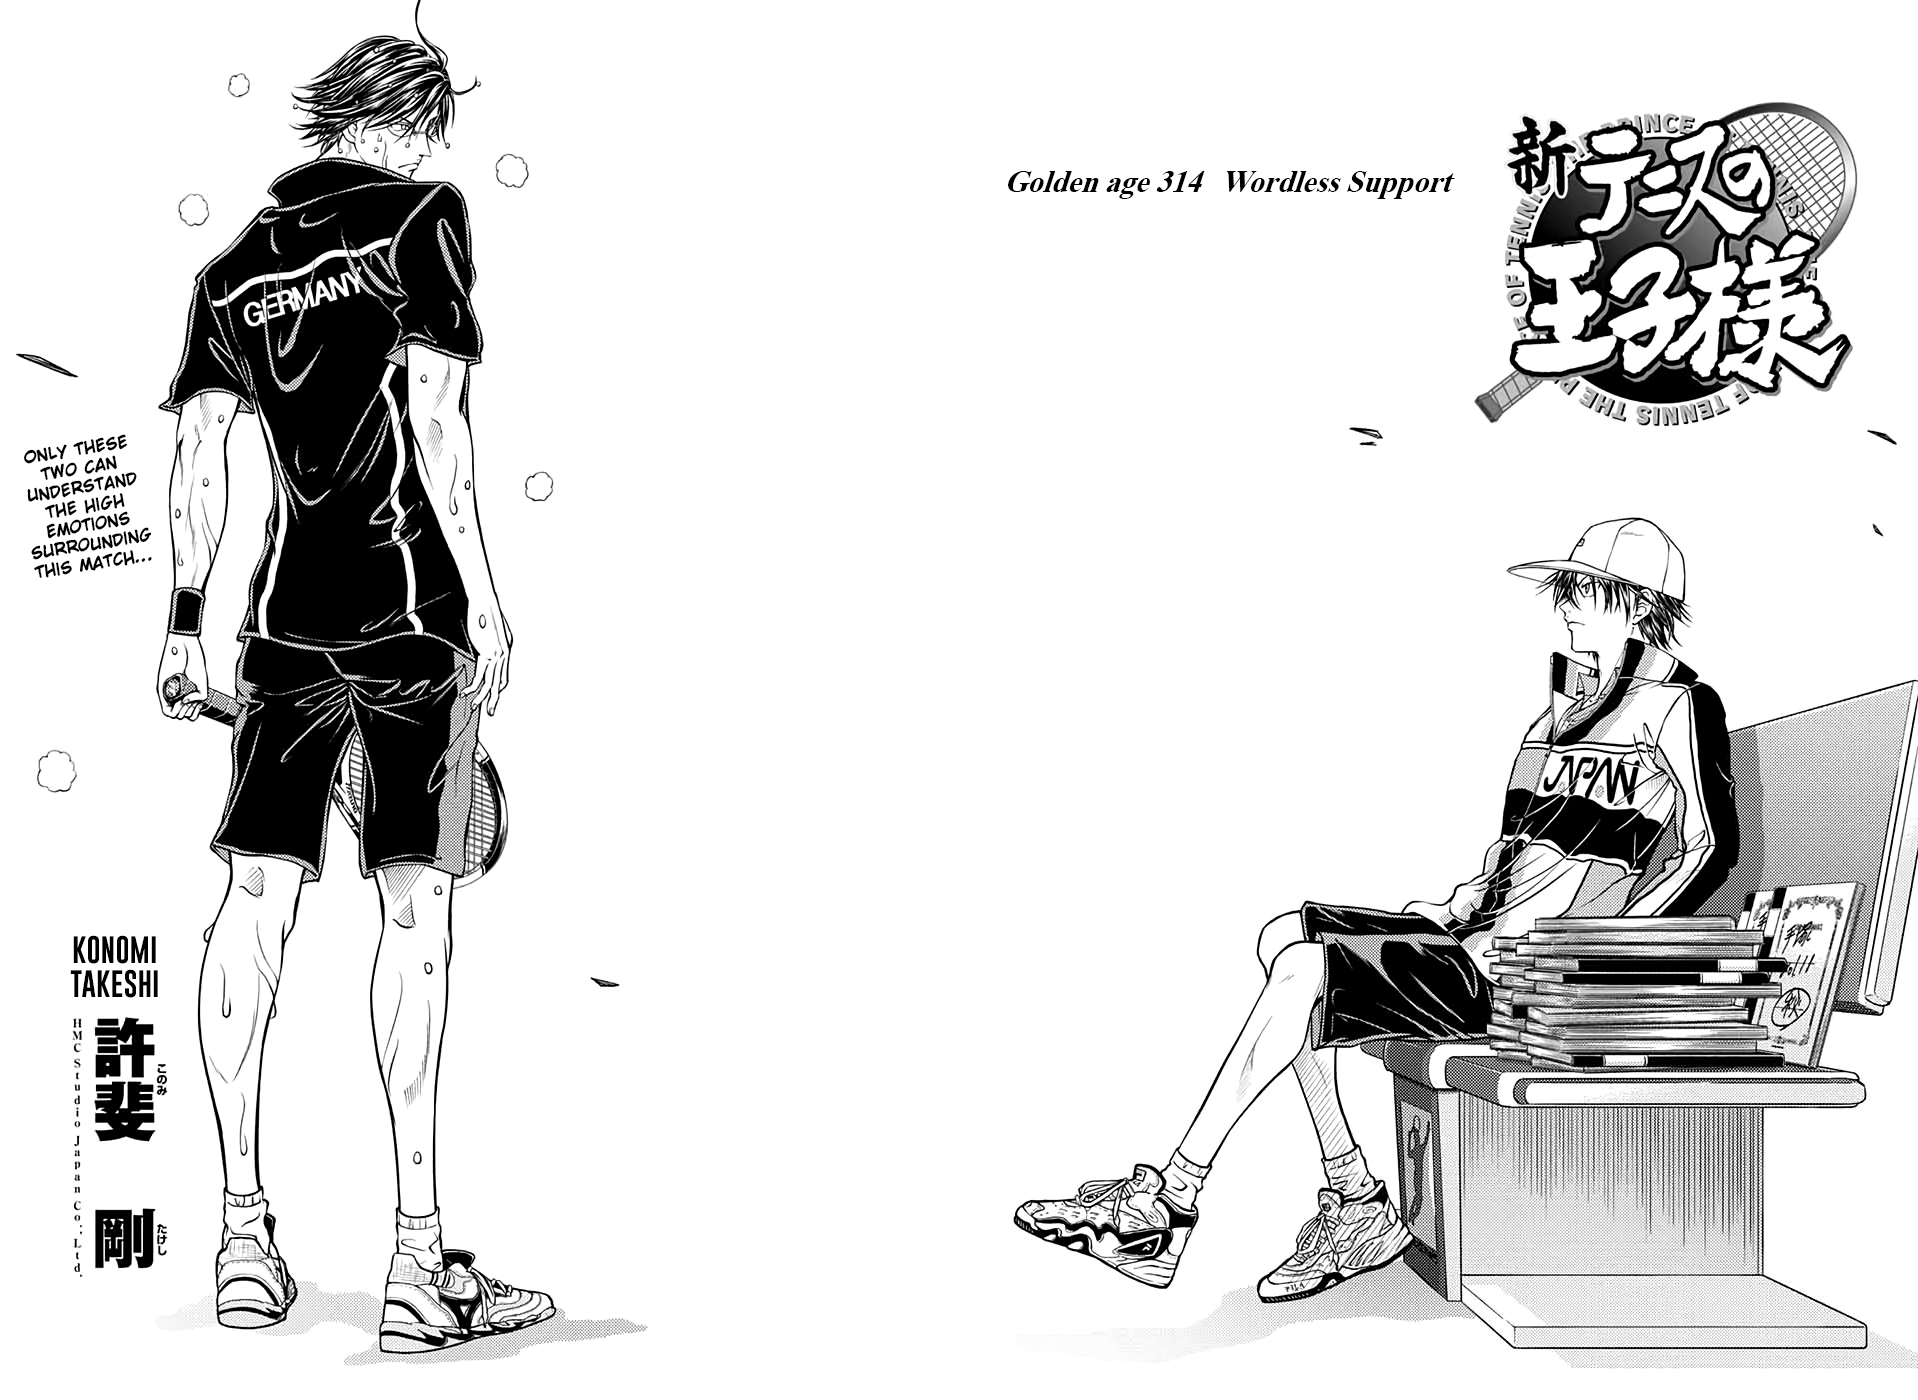 New Prince Of Tennis Vol.32 Chapter 314: Golden Age 314 Wordless Support - Picture 2